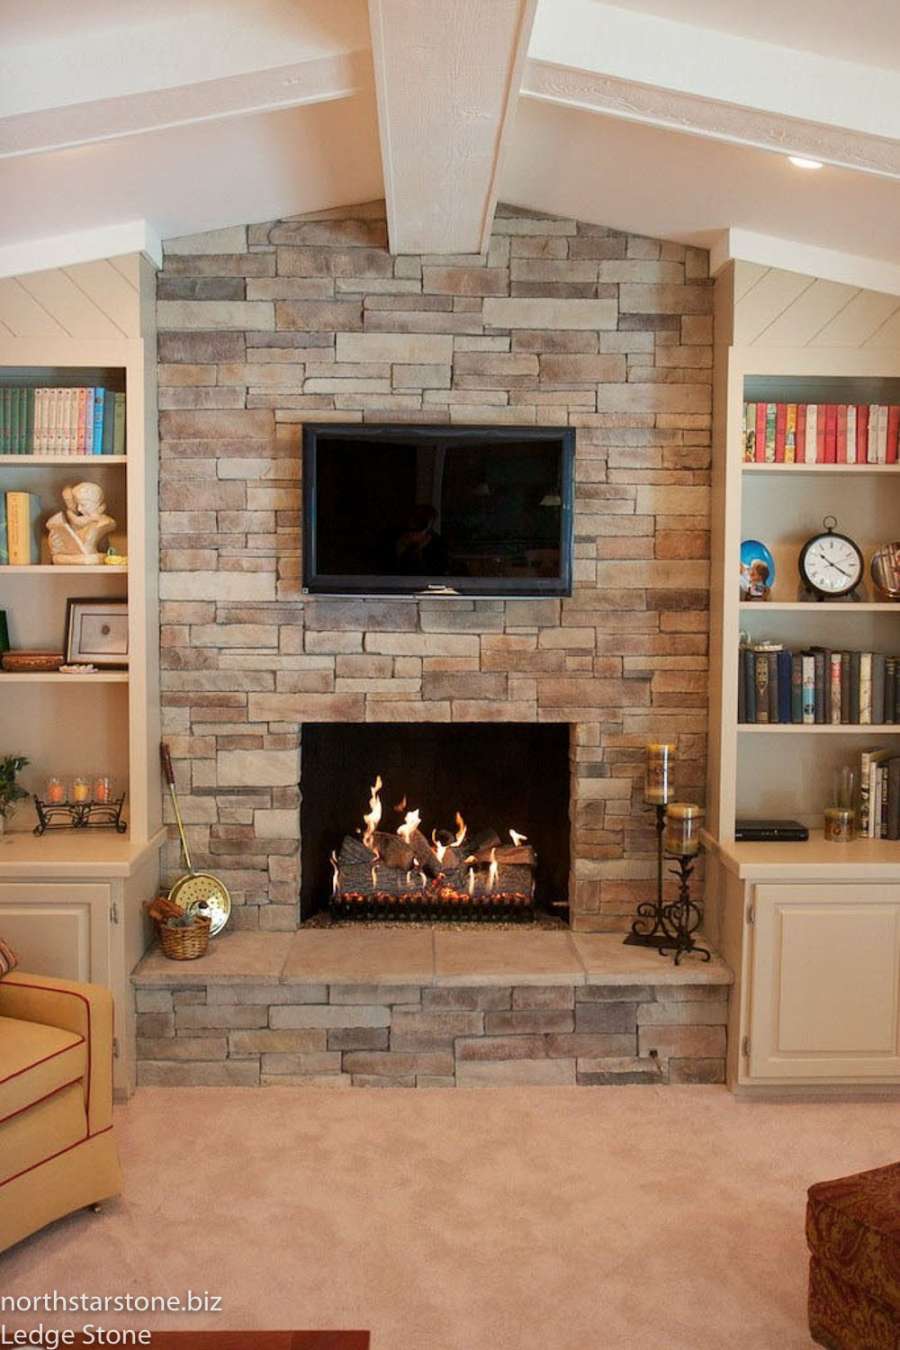 Ledgestone Fireplace Picture Gallery - North Star Stone